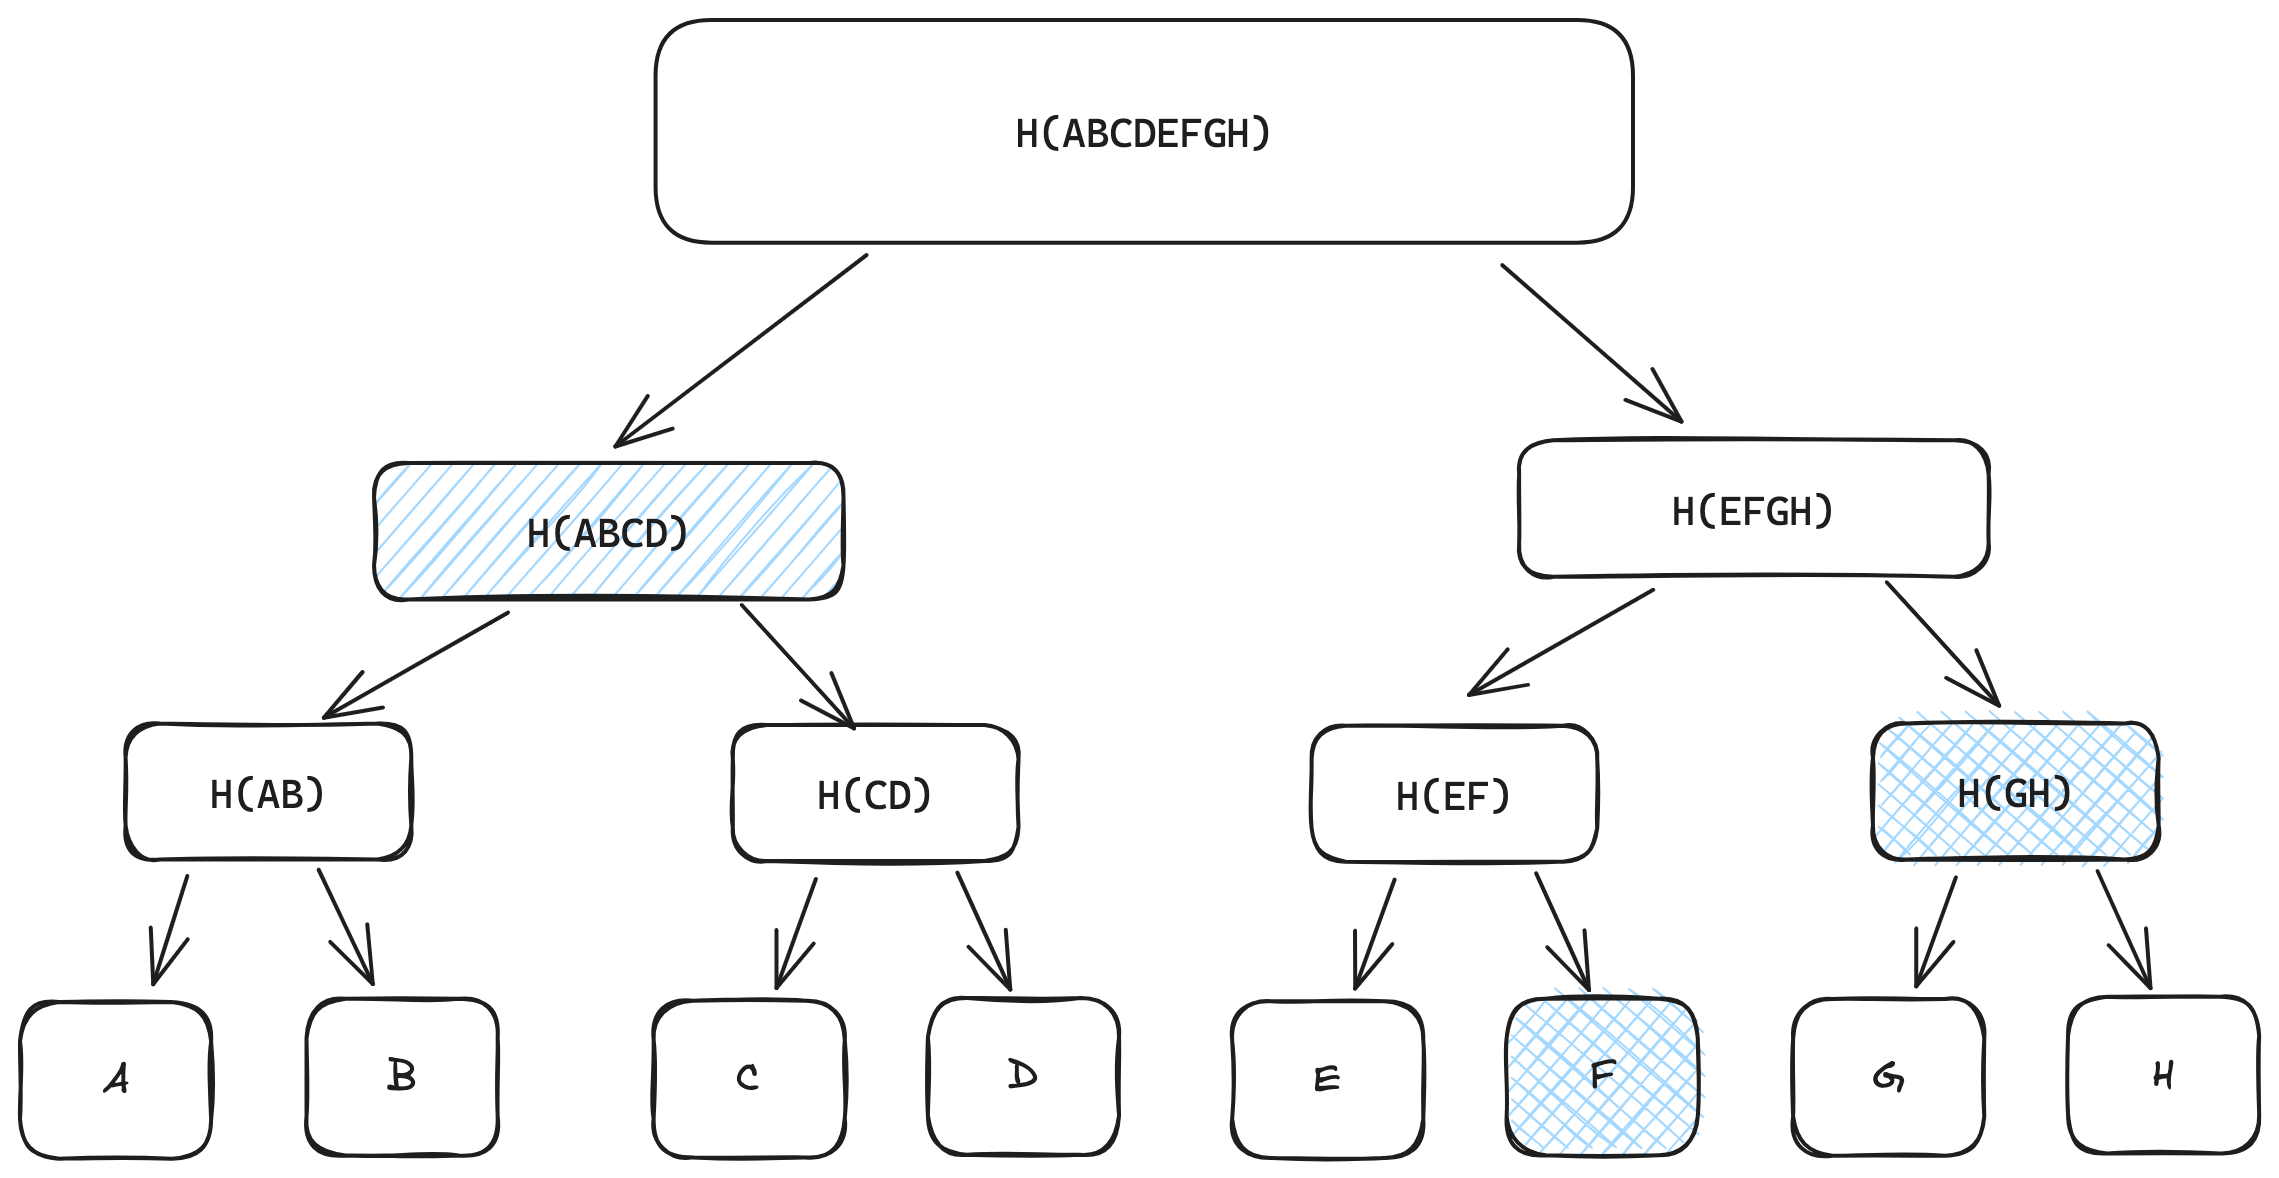 Example of Merkle tree with node highlights